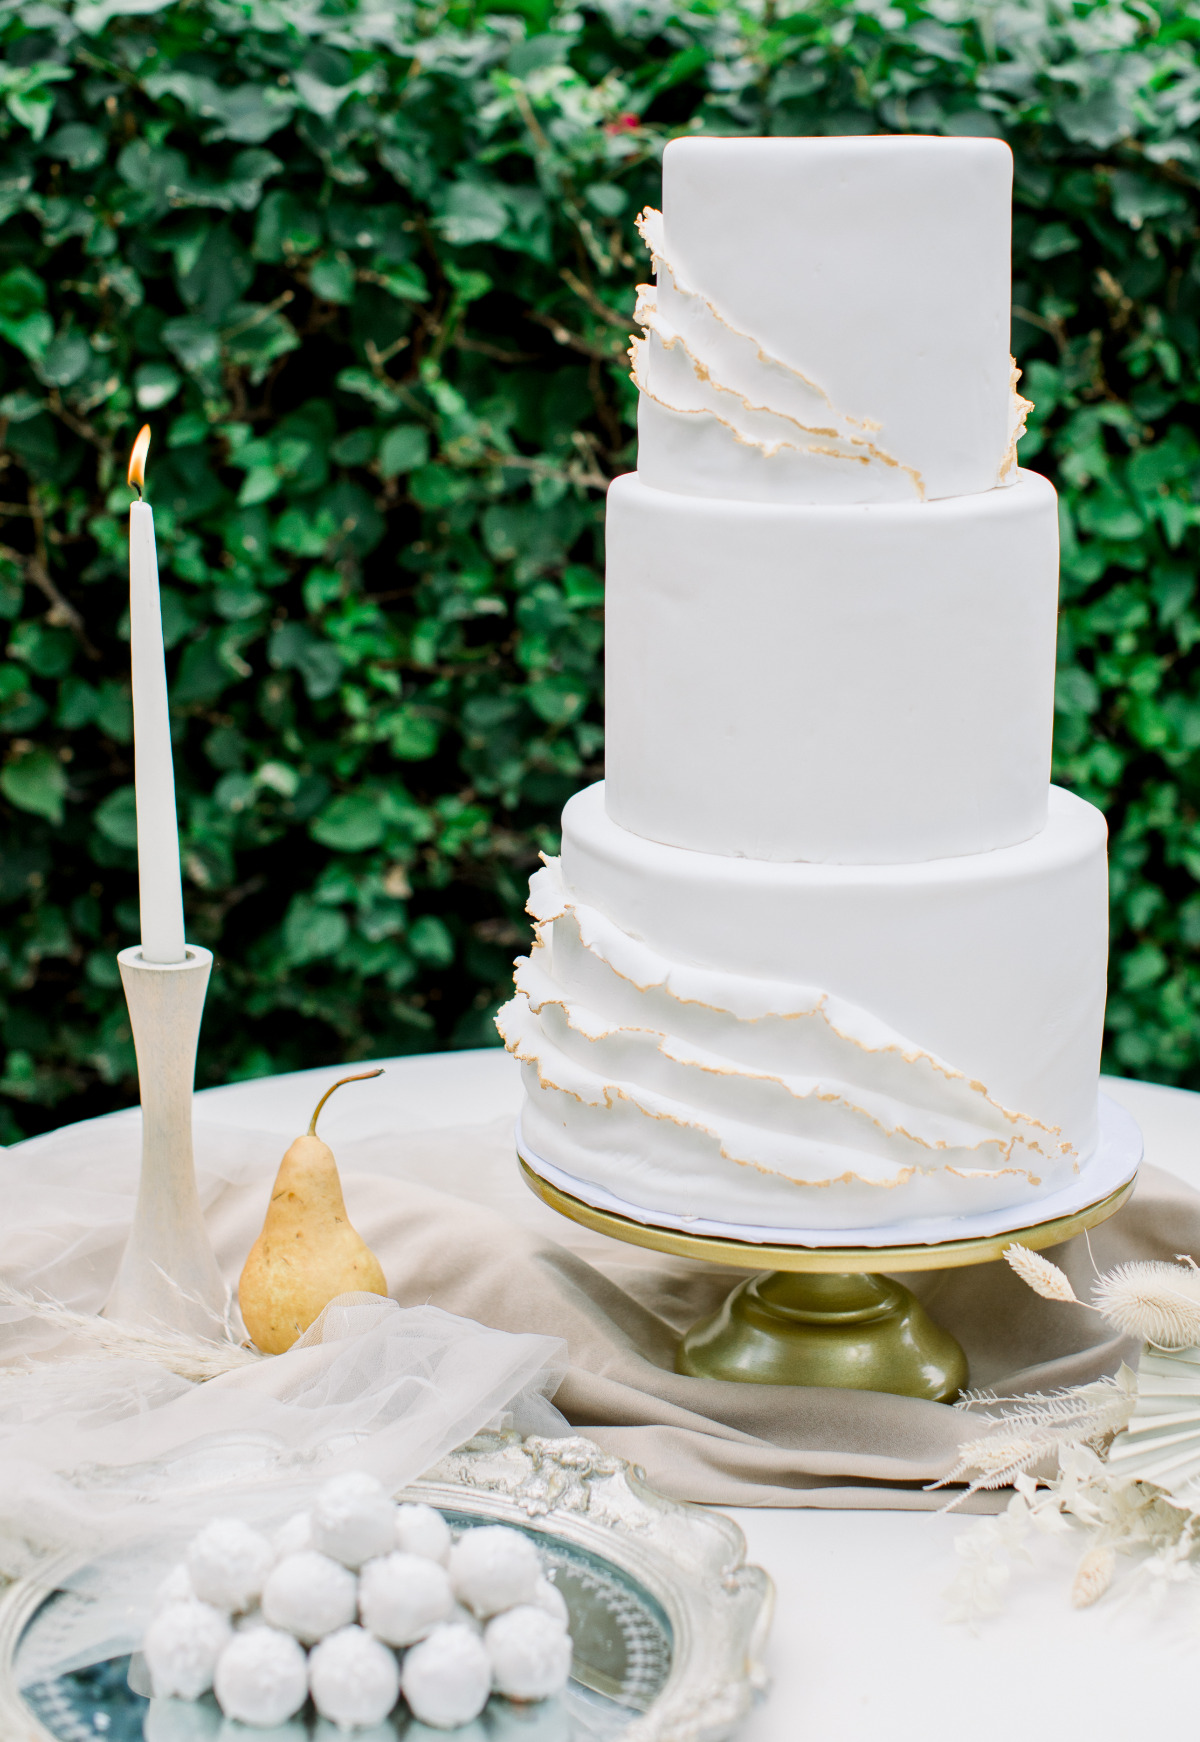 white wedding cake with burnt ruffle sides by Amour de Sucre